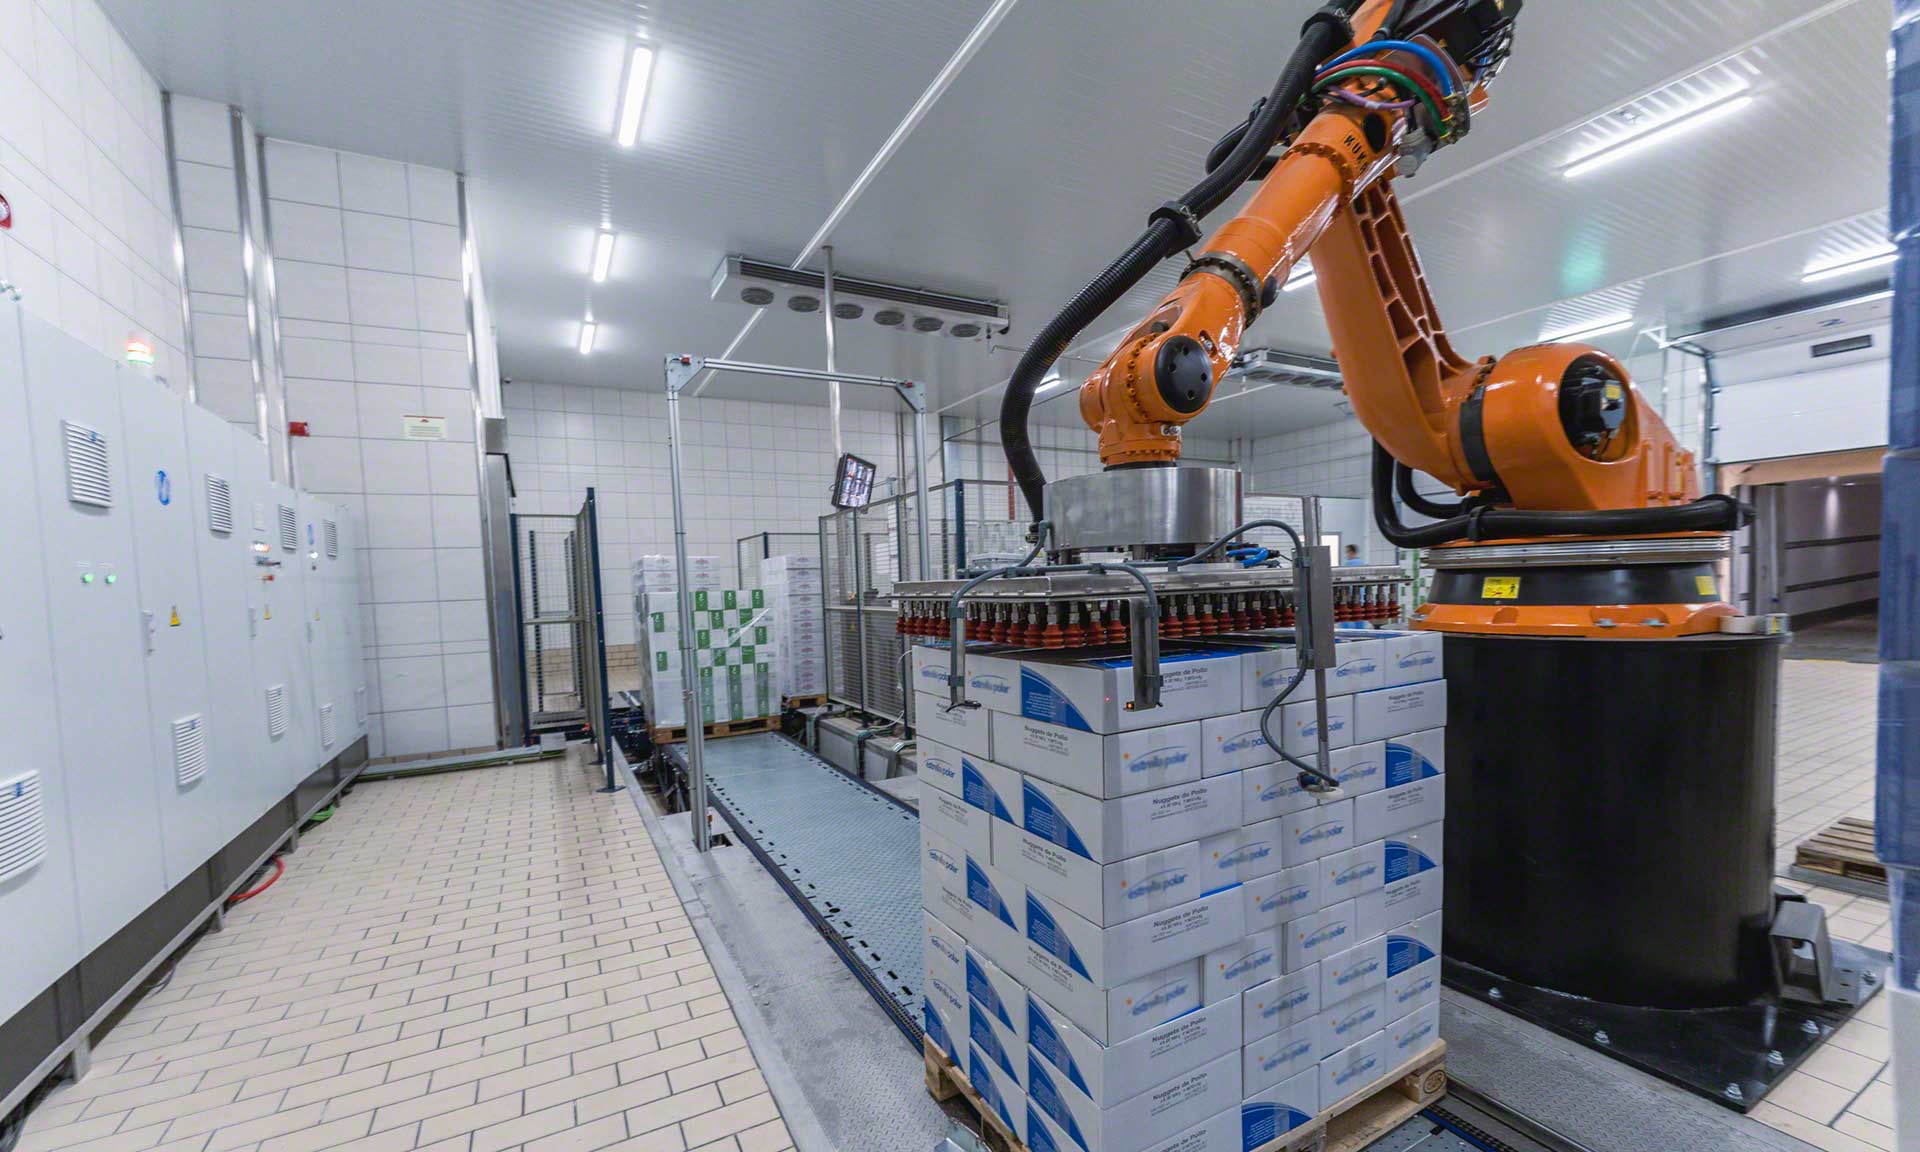 Warehouse robots speed up storage and order prep tasks and make them more efficient